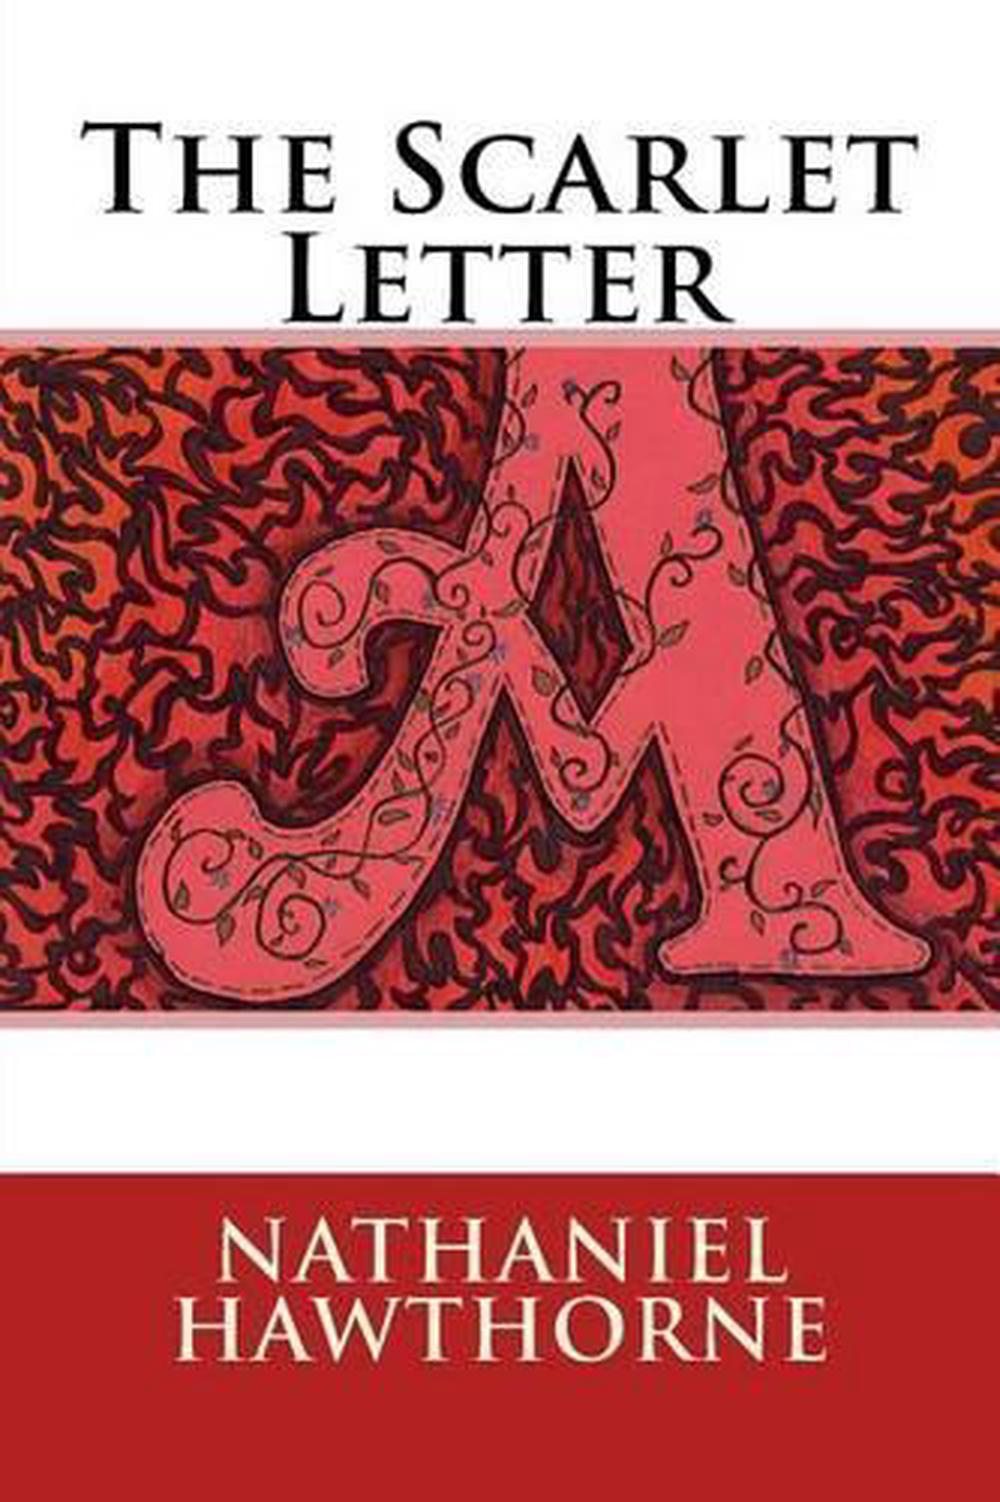 The Scarlet Letter by Nathaniel Hawthorne (English) Paperback Book Free